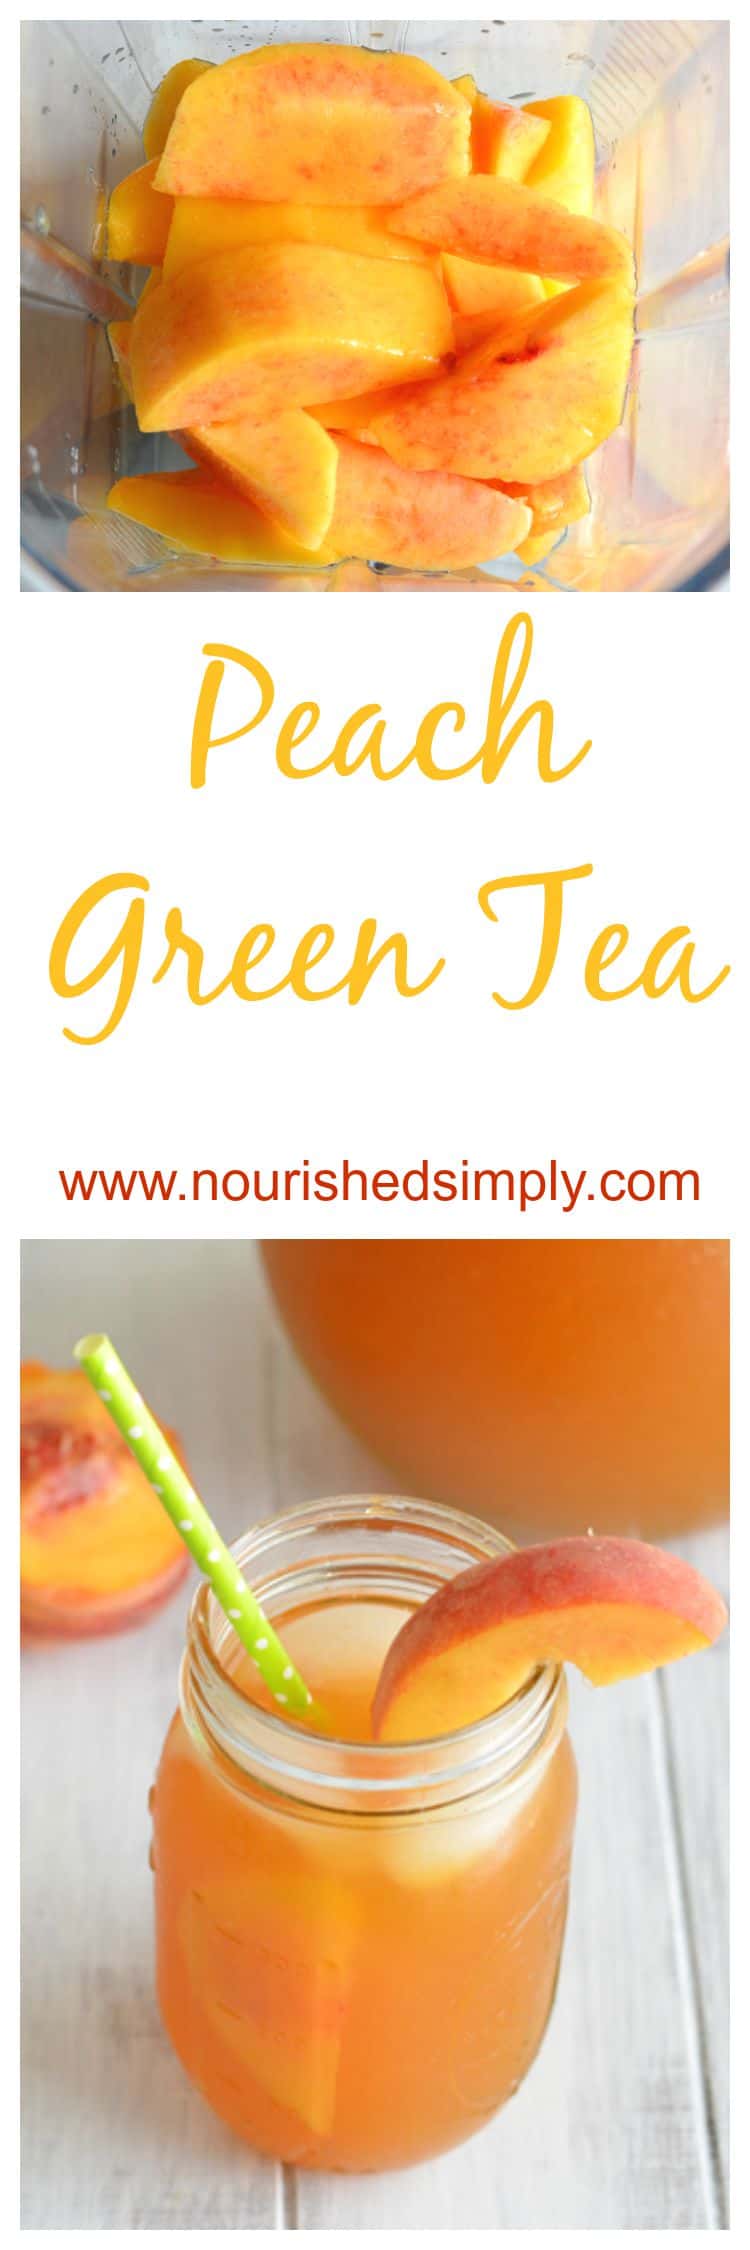 Peach Green Tea made with real peaches and lightly sweetened